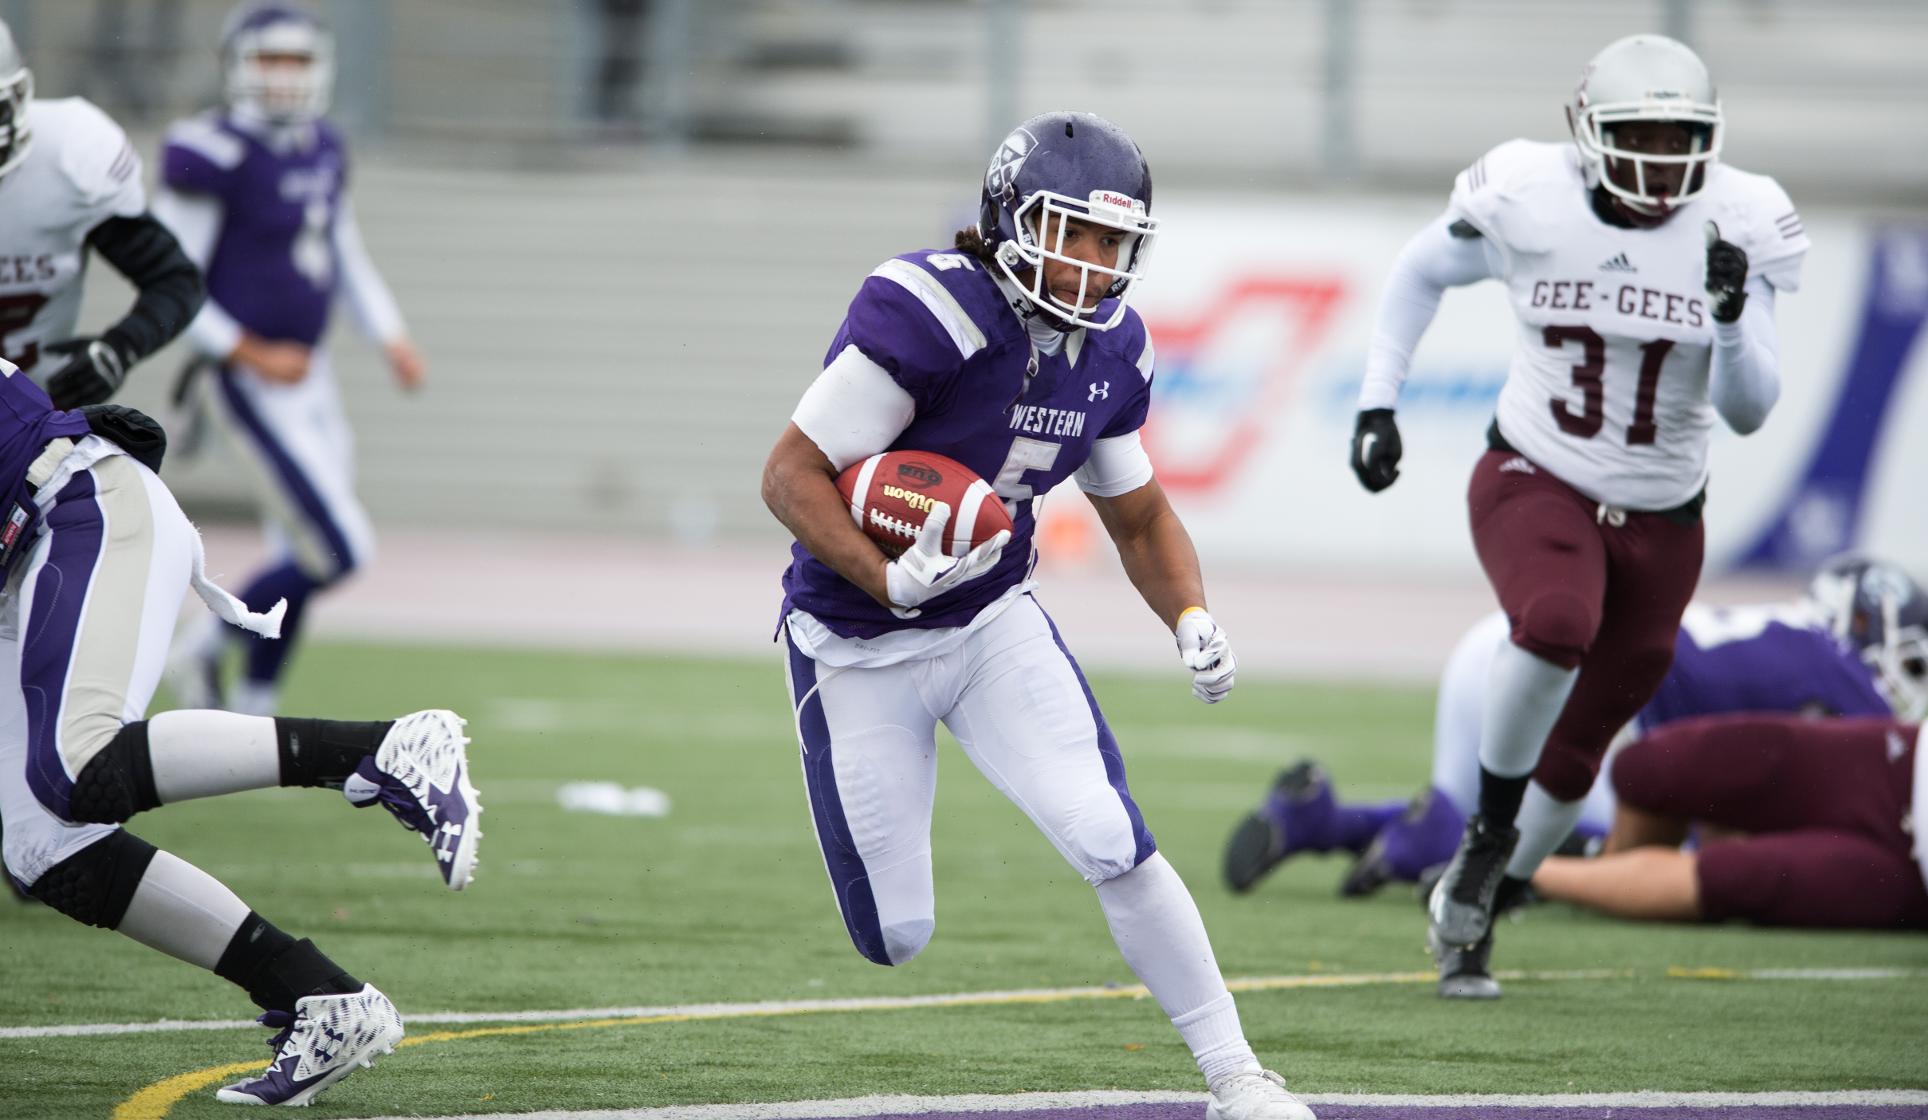 2016 CIS FOOTBALL PLAYER TO WATCH: Western's Alex Taylor